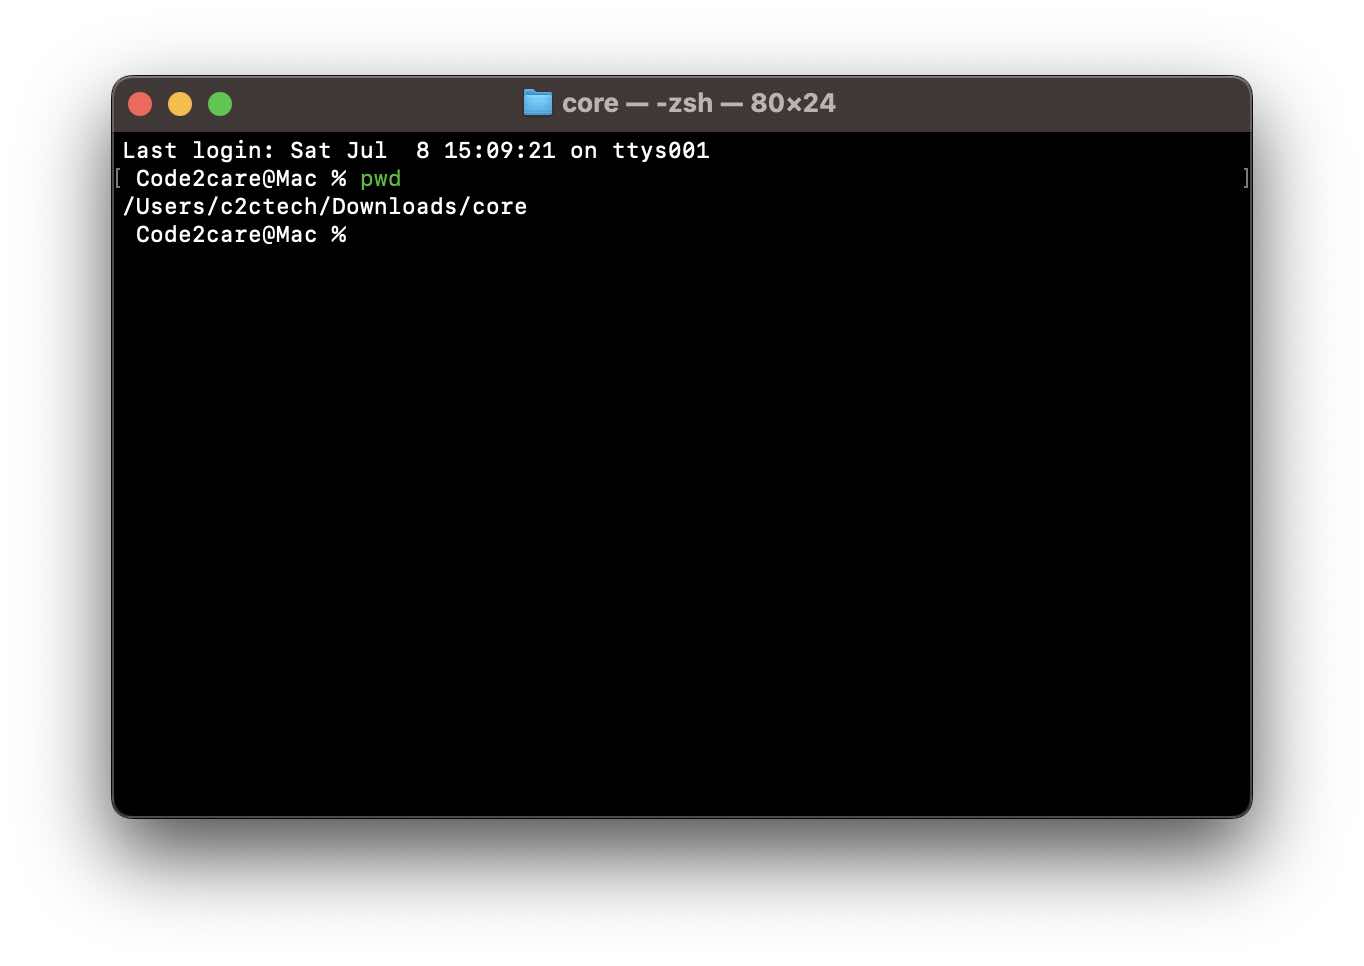 Terminal Location opened using Finder